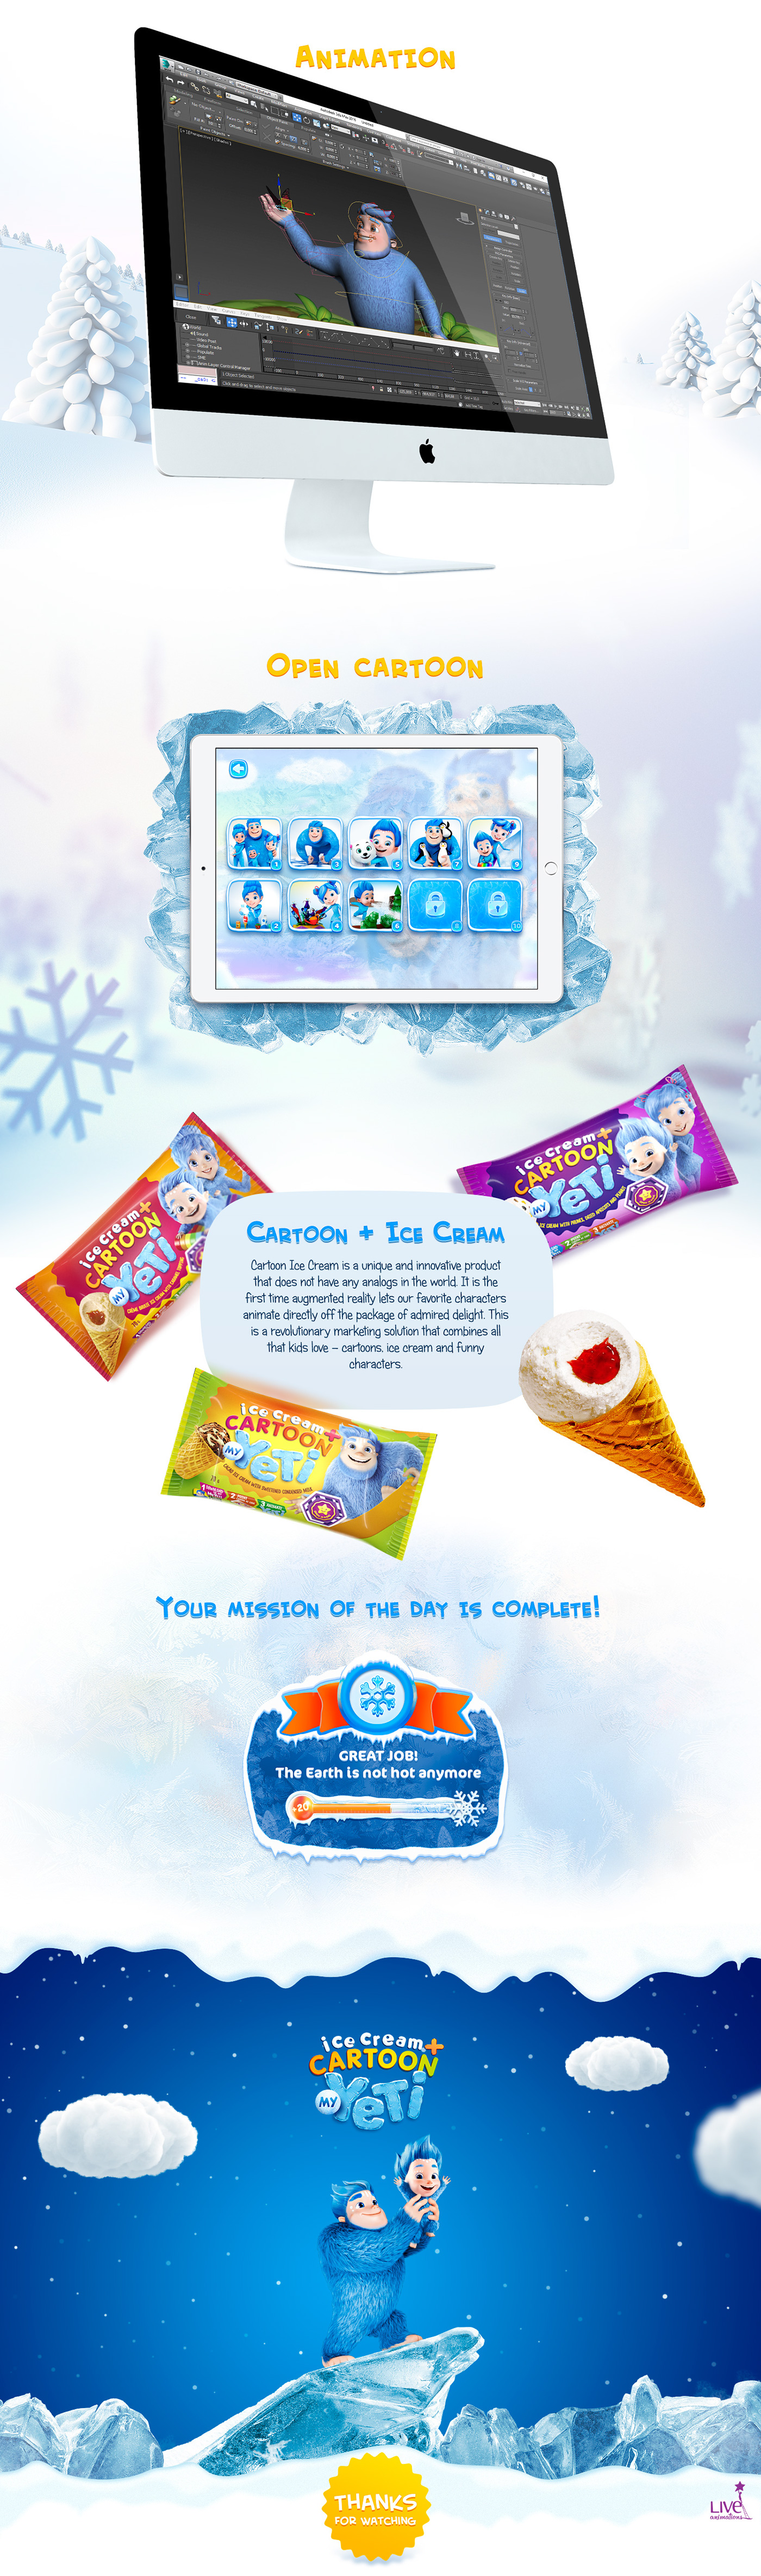 augmented reality AR ice cream yeti application Mixed Reality kids app snow people Live animations marketing campaign